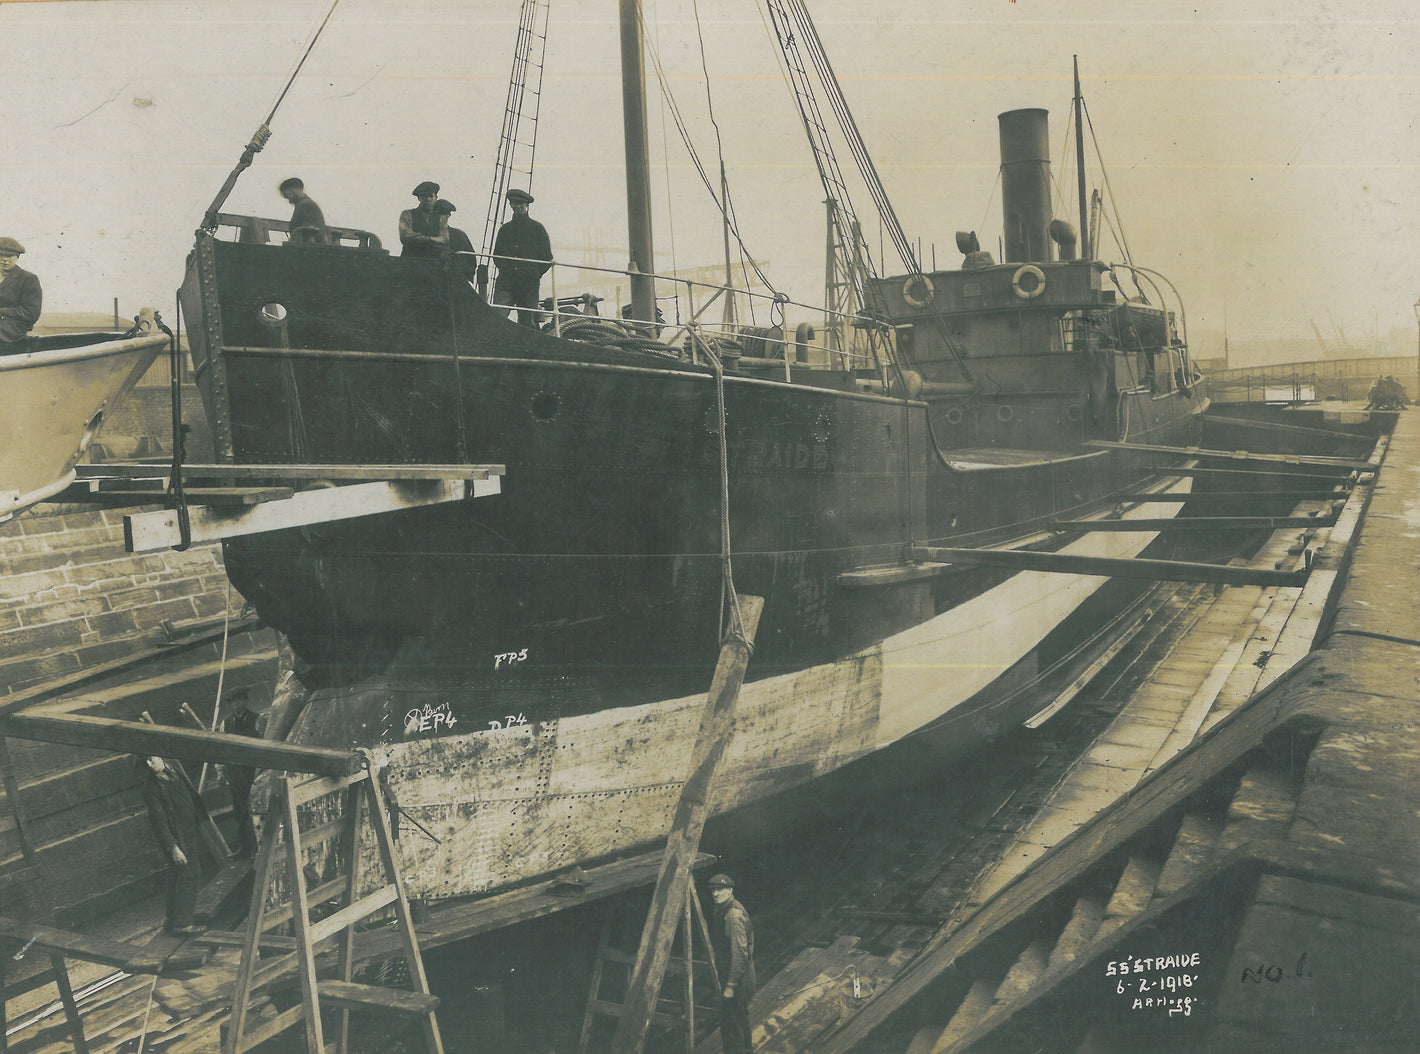 The SS Straide is repaired after suffering damages from a german mine. Photo shows date as 1918 Belfast docks.